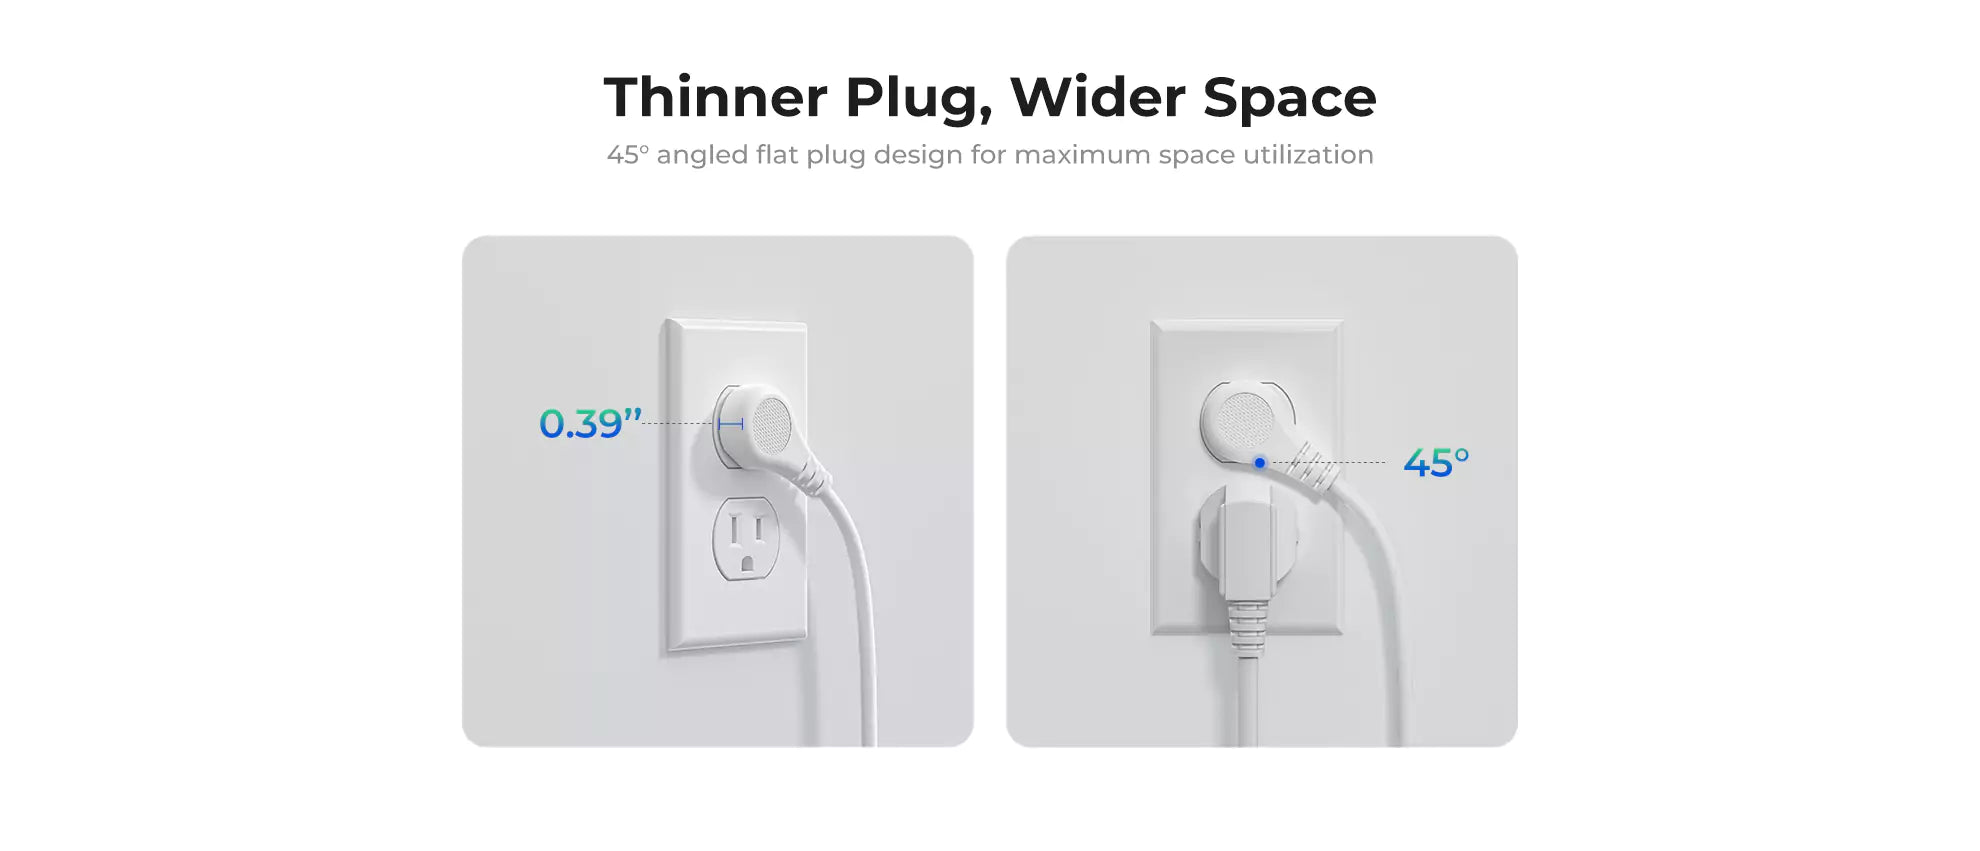 thinner plug, wider space